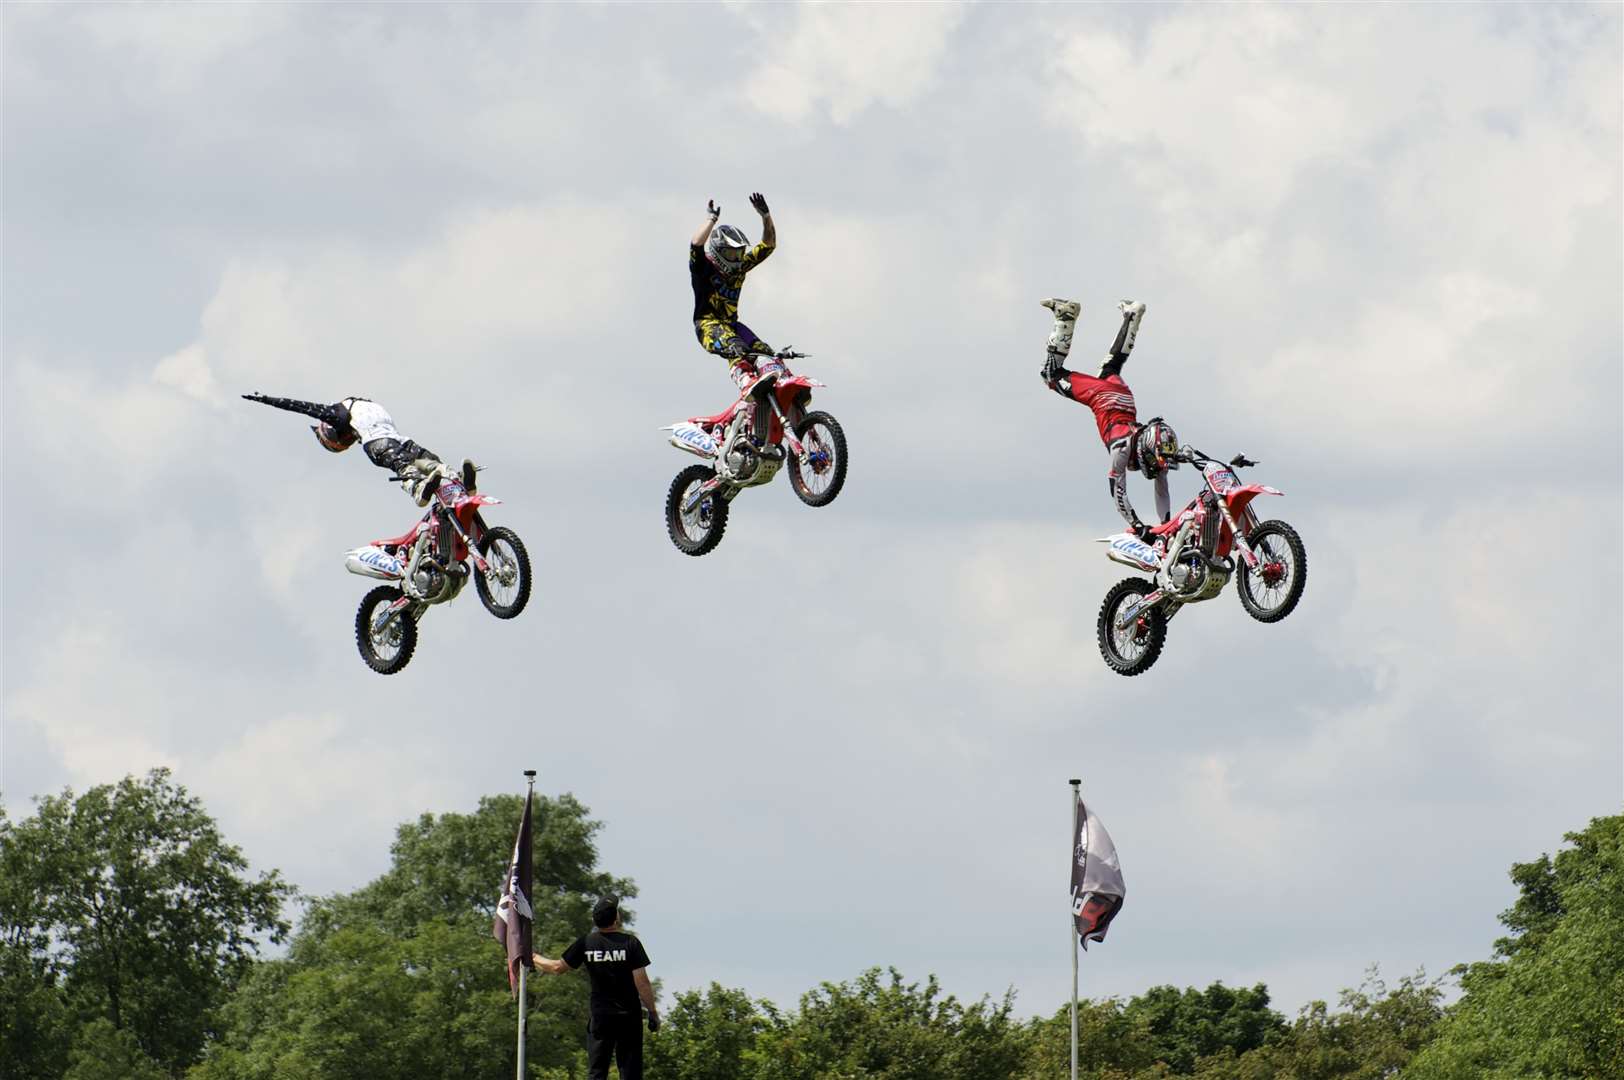 The Bolddog Lings Motorcycle Display team perform in 2011 Picture: Andy Payton